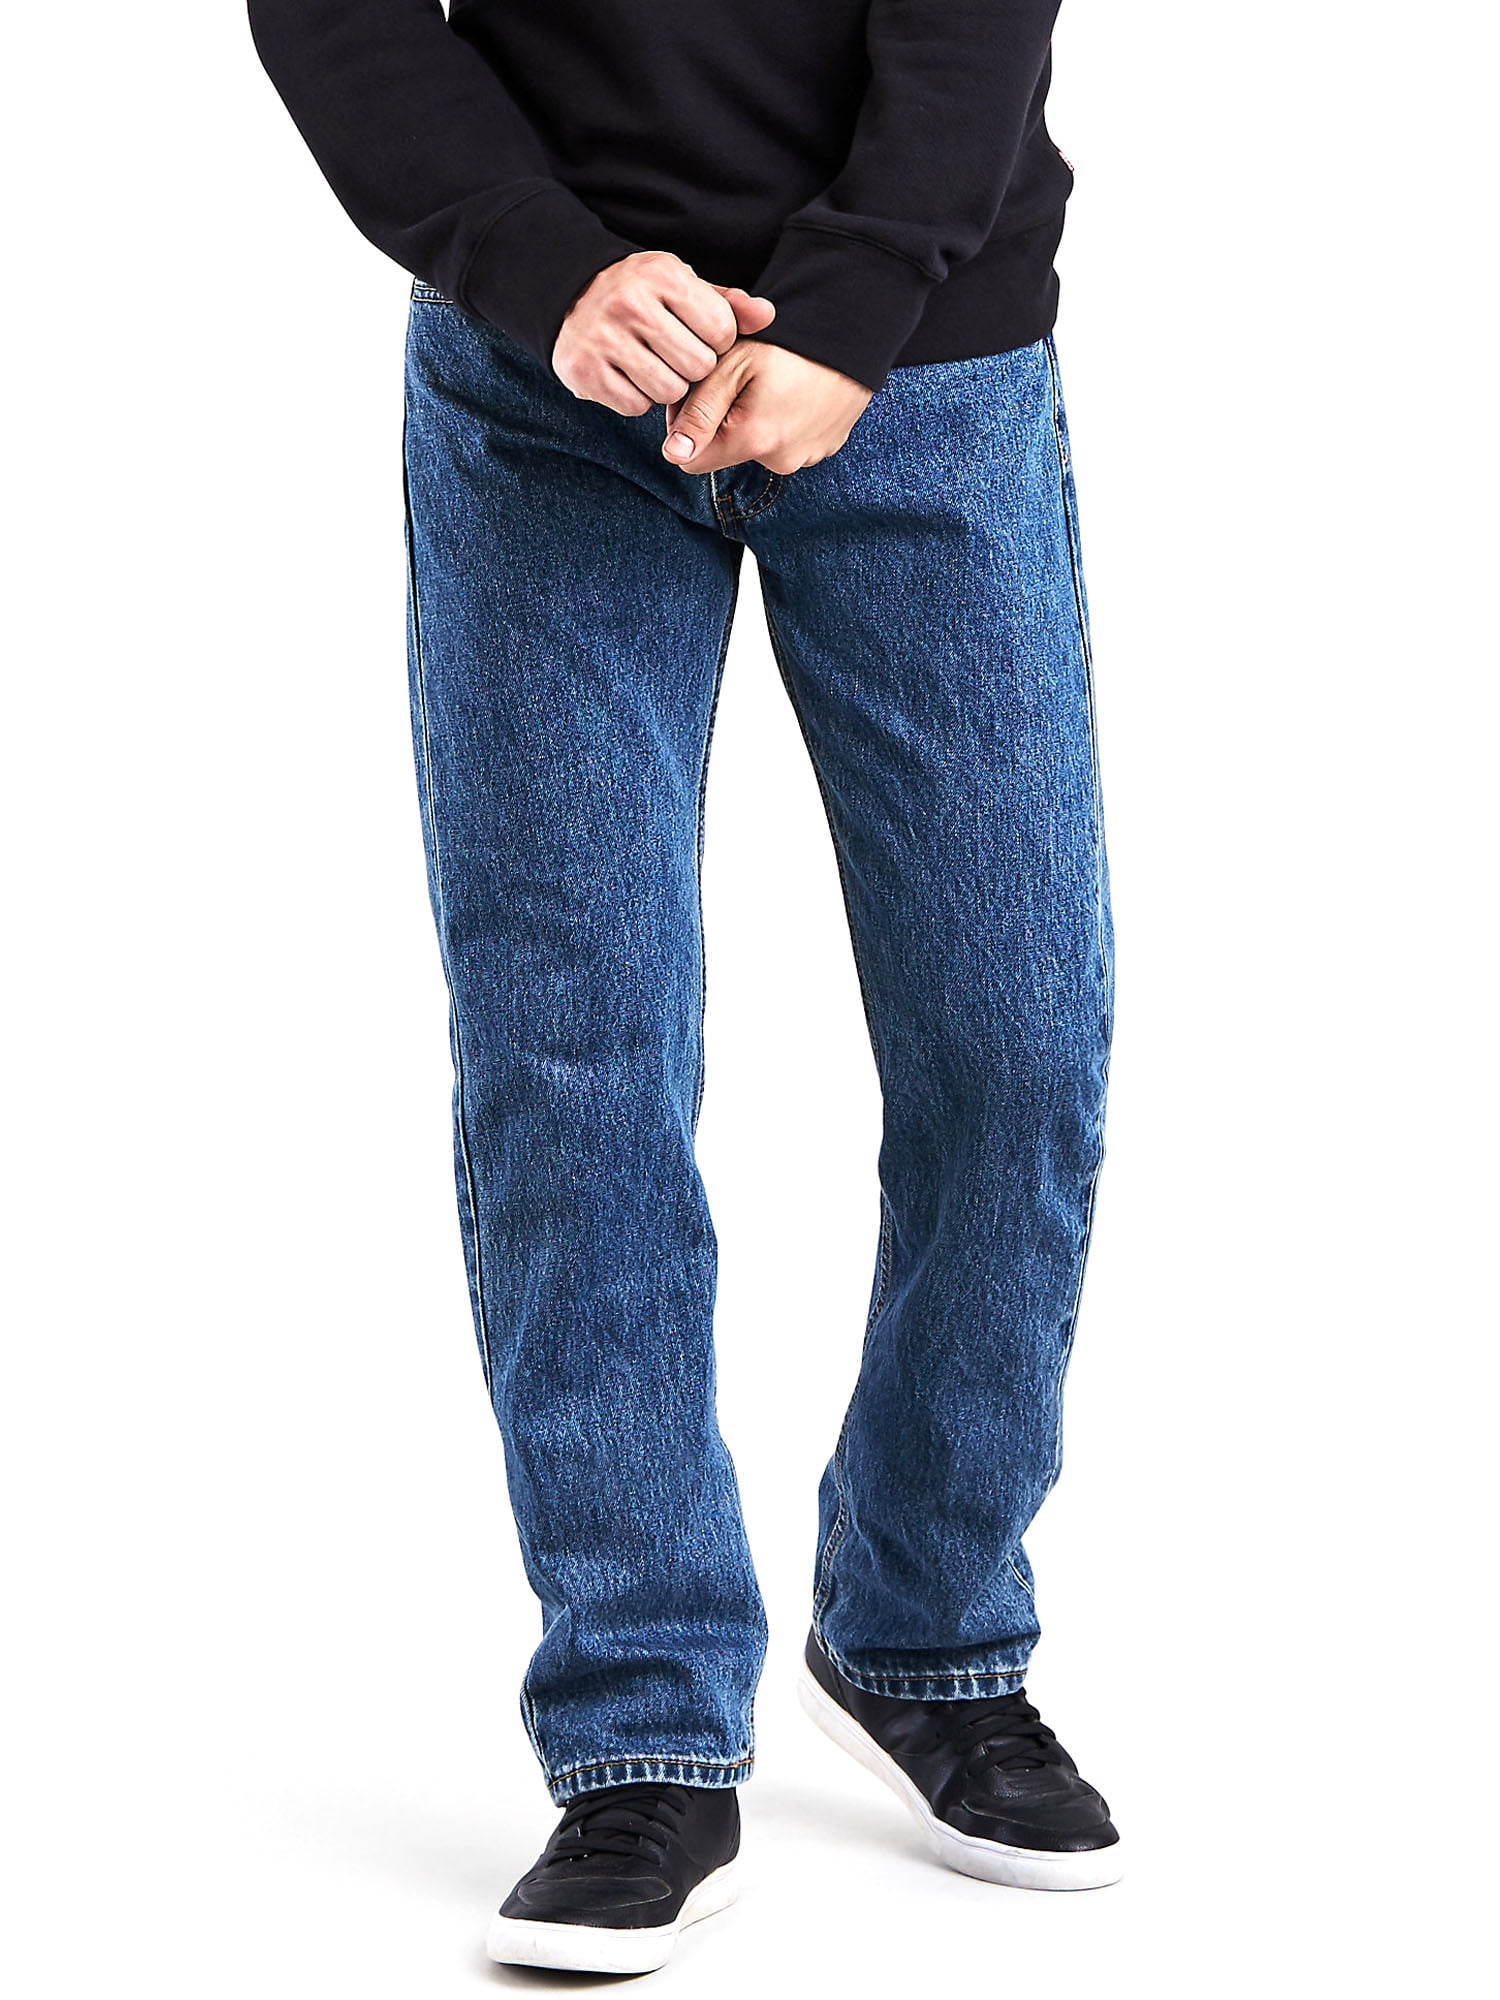 Mens BIG SIZE Regular Fit Hard Wearing Jeans By Denim and Dye Straight Leg